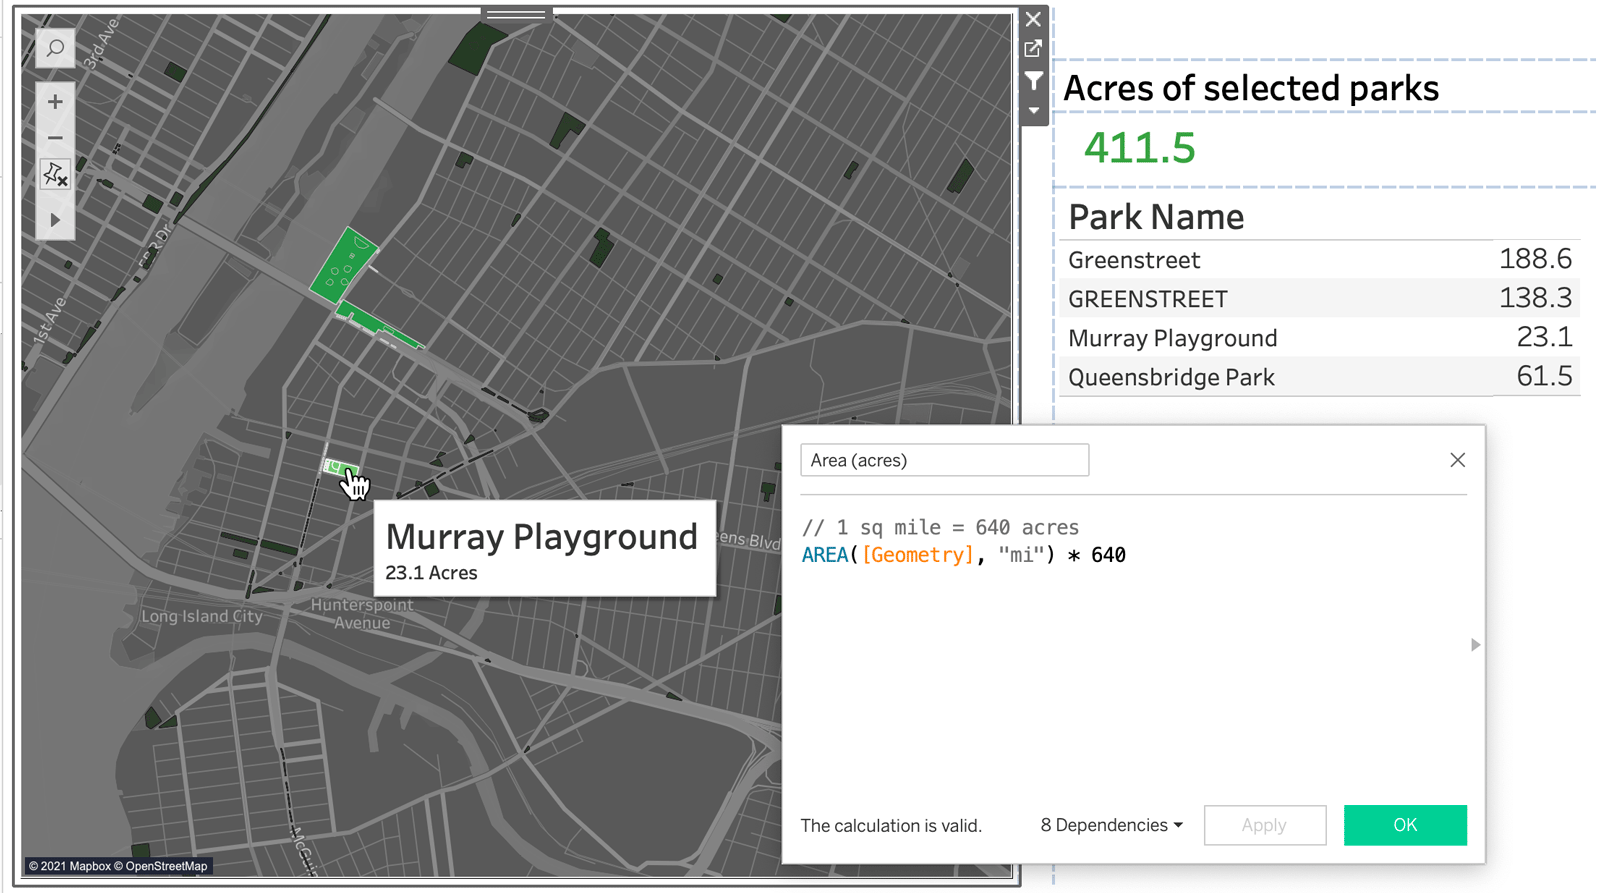 An image of a map in Tableau utilizing the area spatial calculation to find the total area of multiple parks selected on the map.